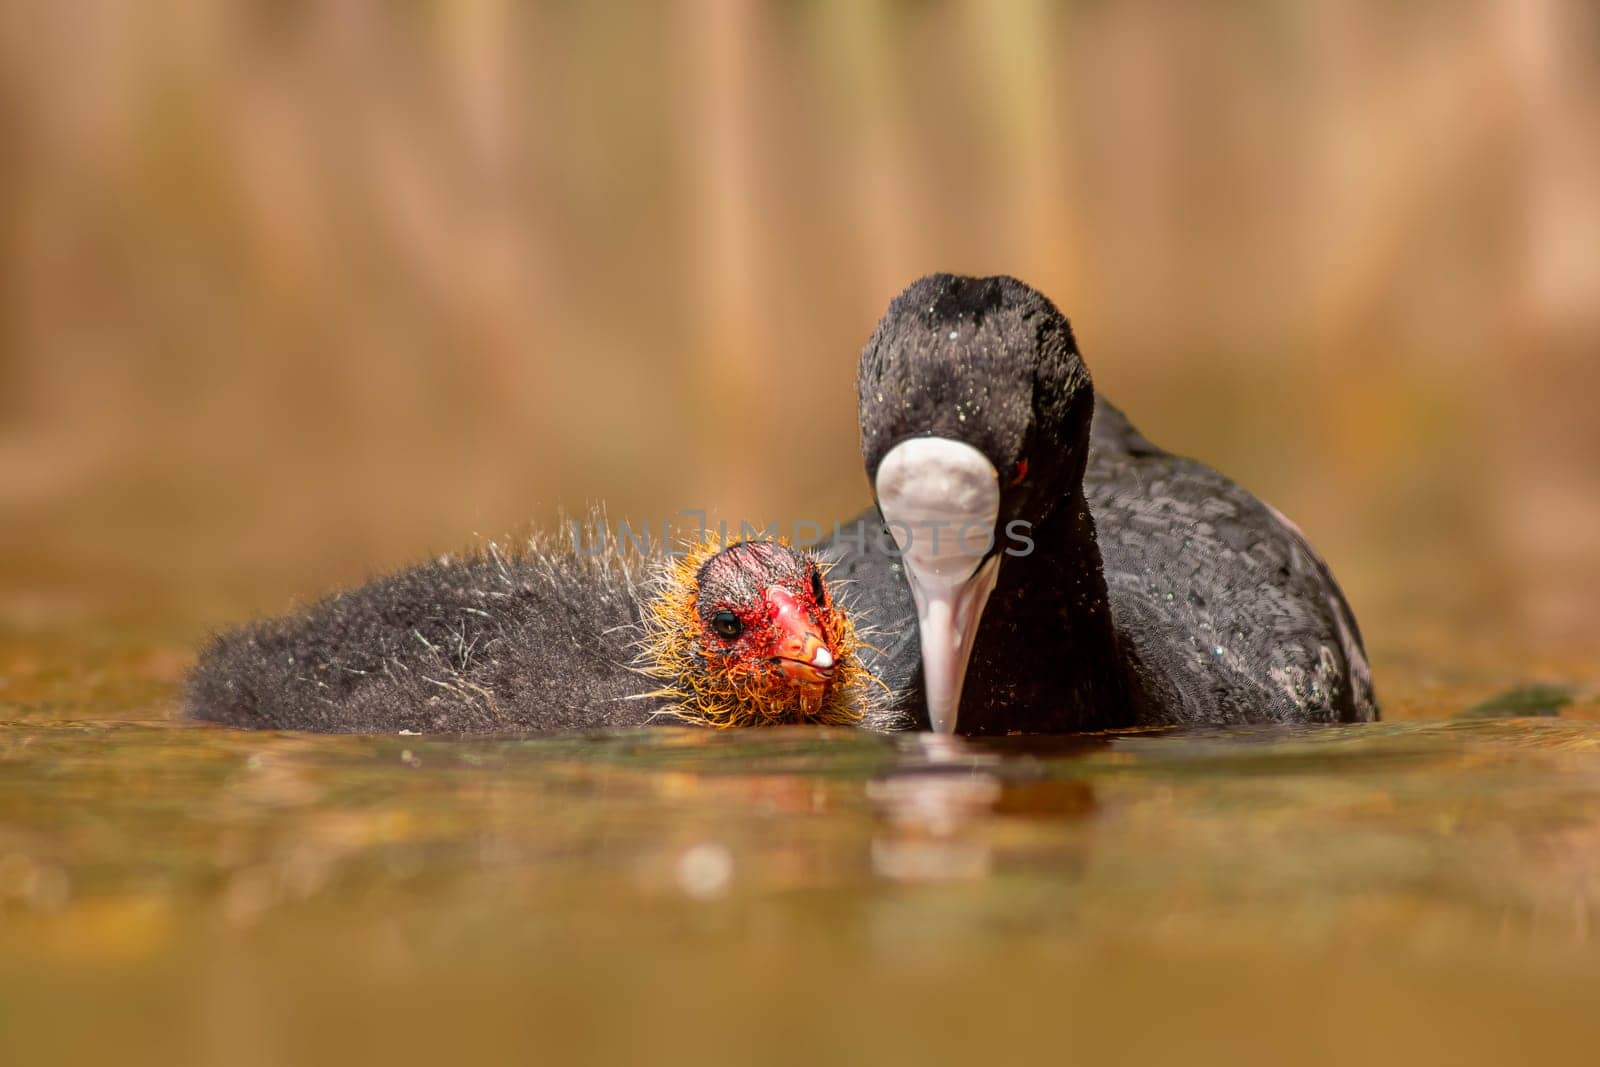 a adult coot (Fulica atra) feeds its young chick on a reflecting lake